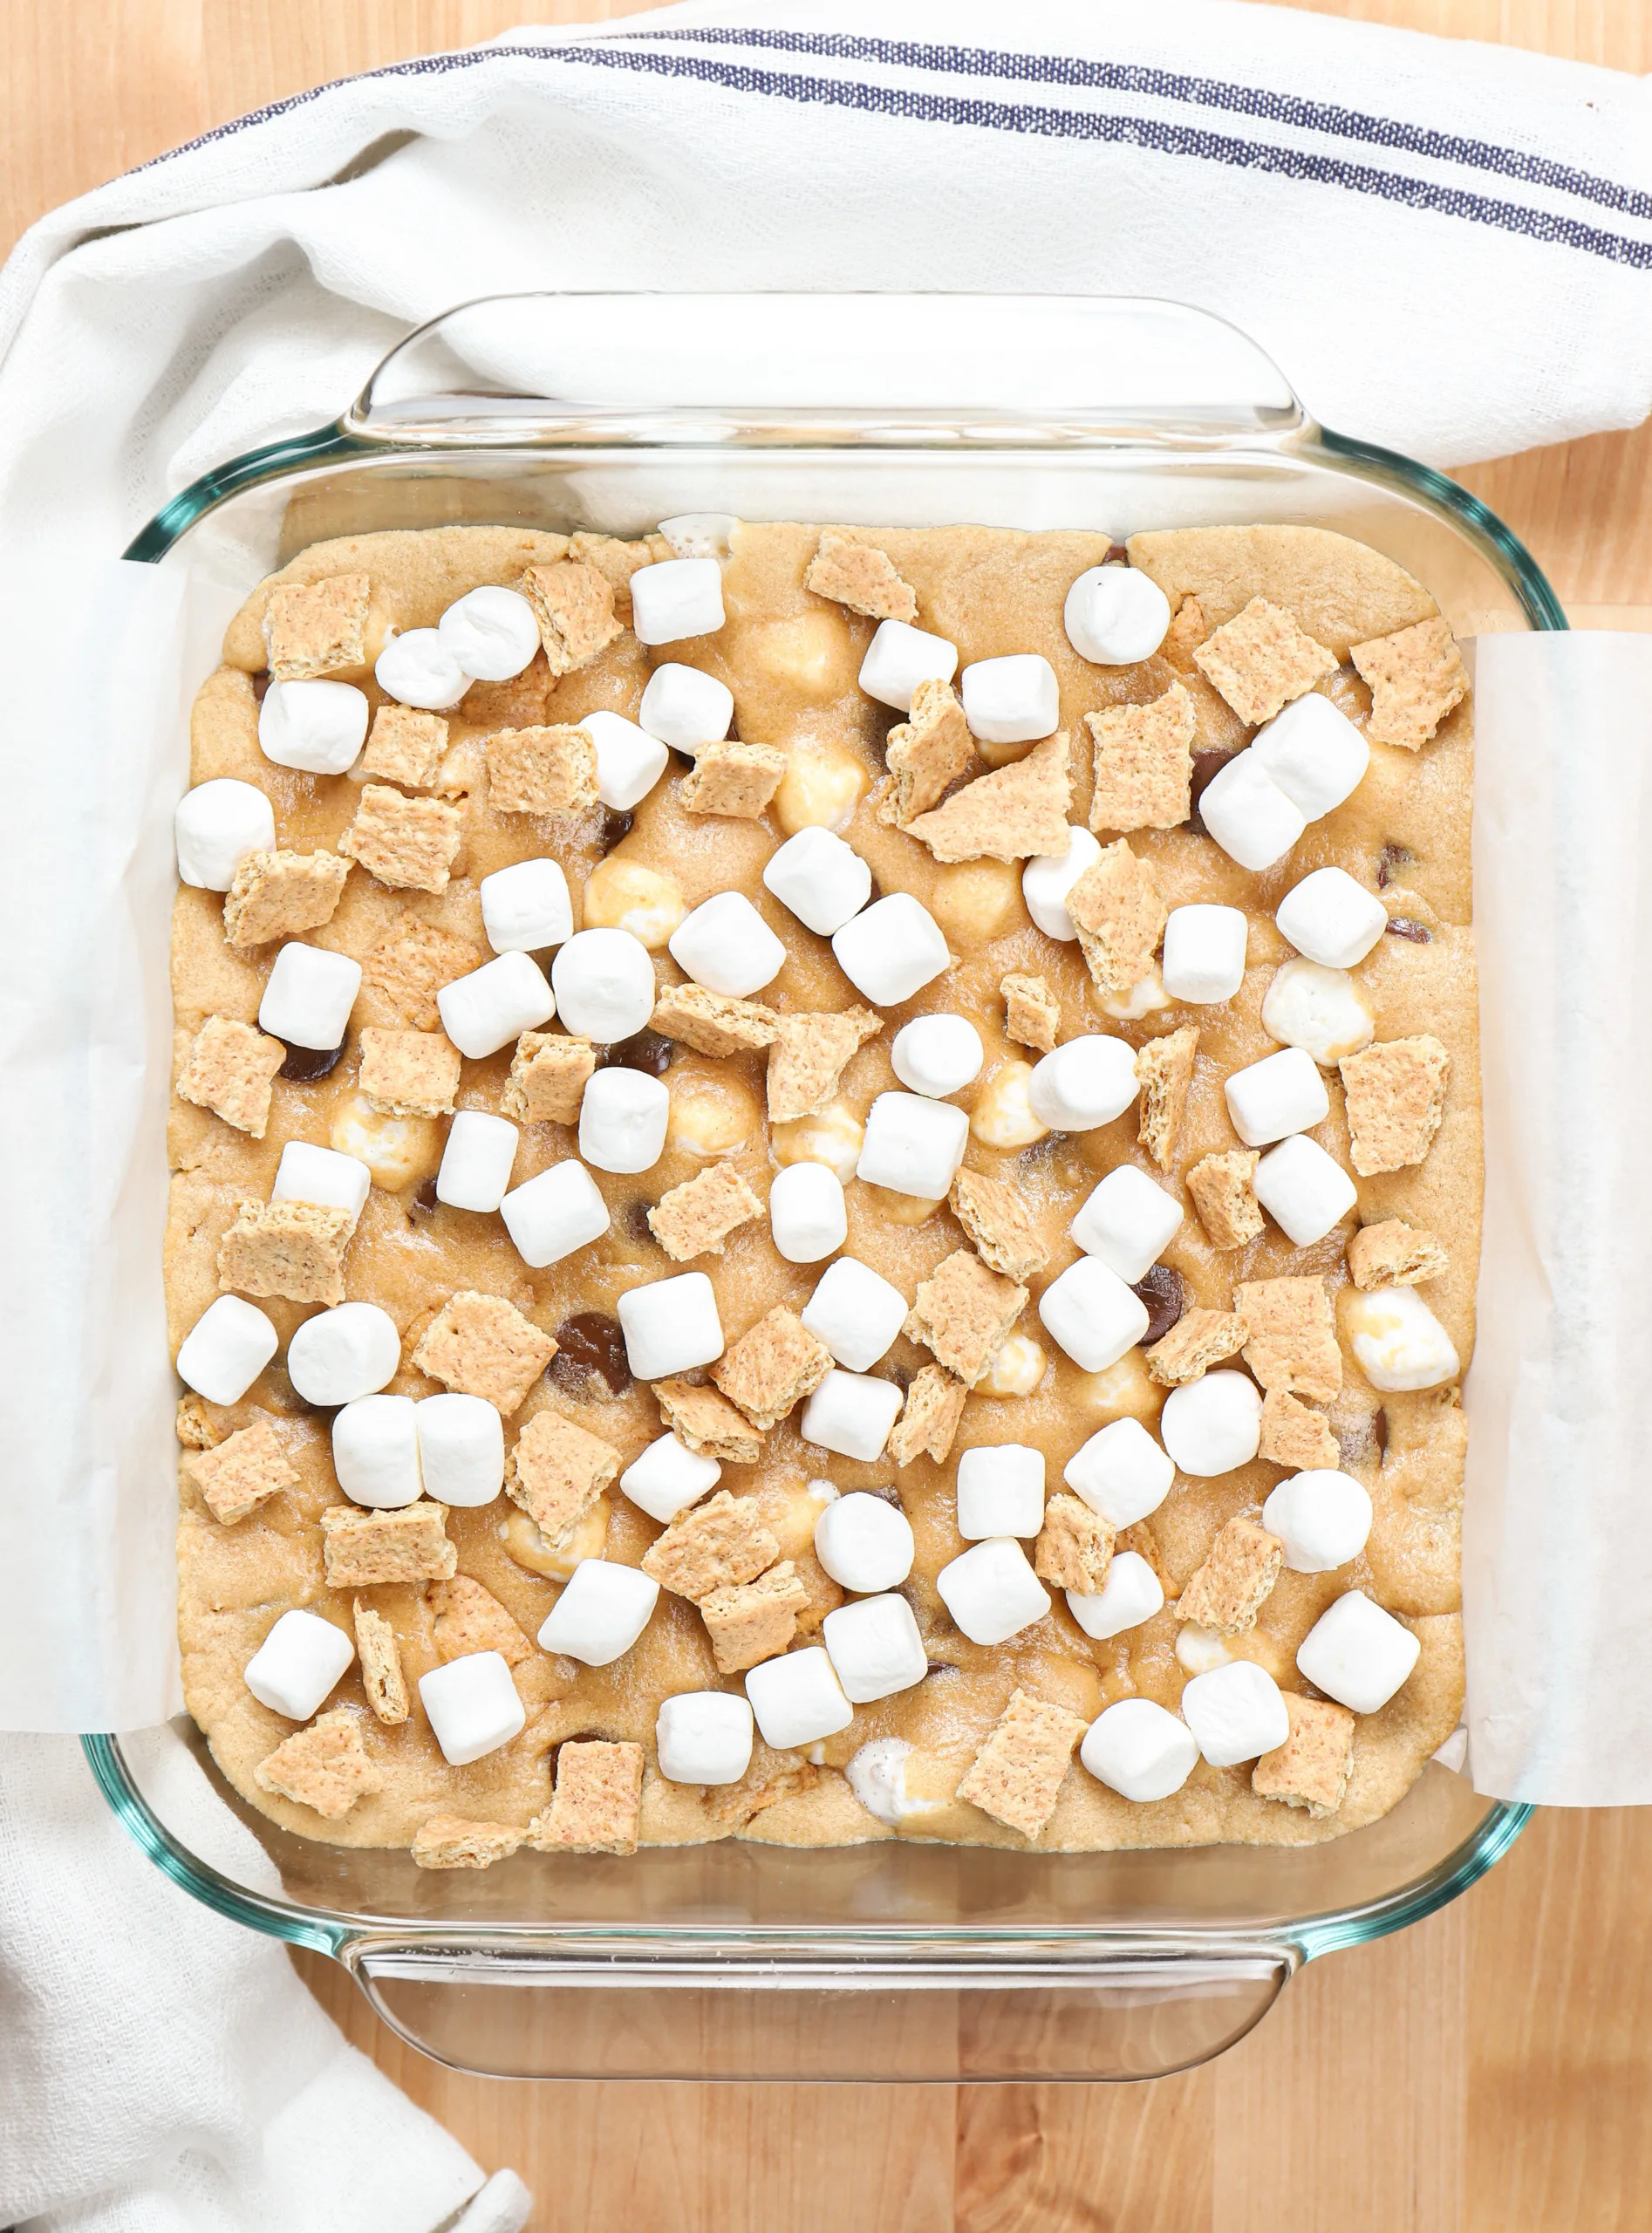 Overhead view of a pan of peanut butter smores bars halfway through baking with mini marshmallows added on top.